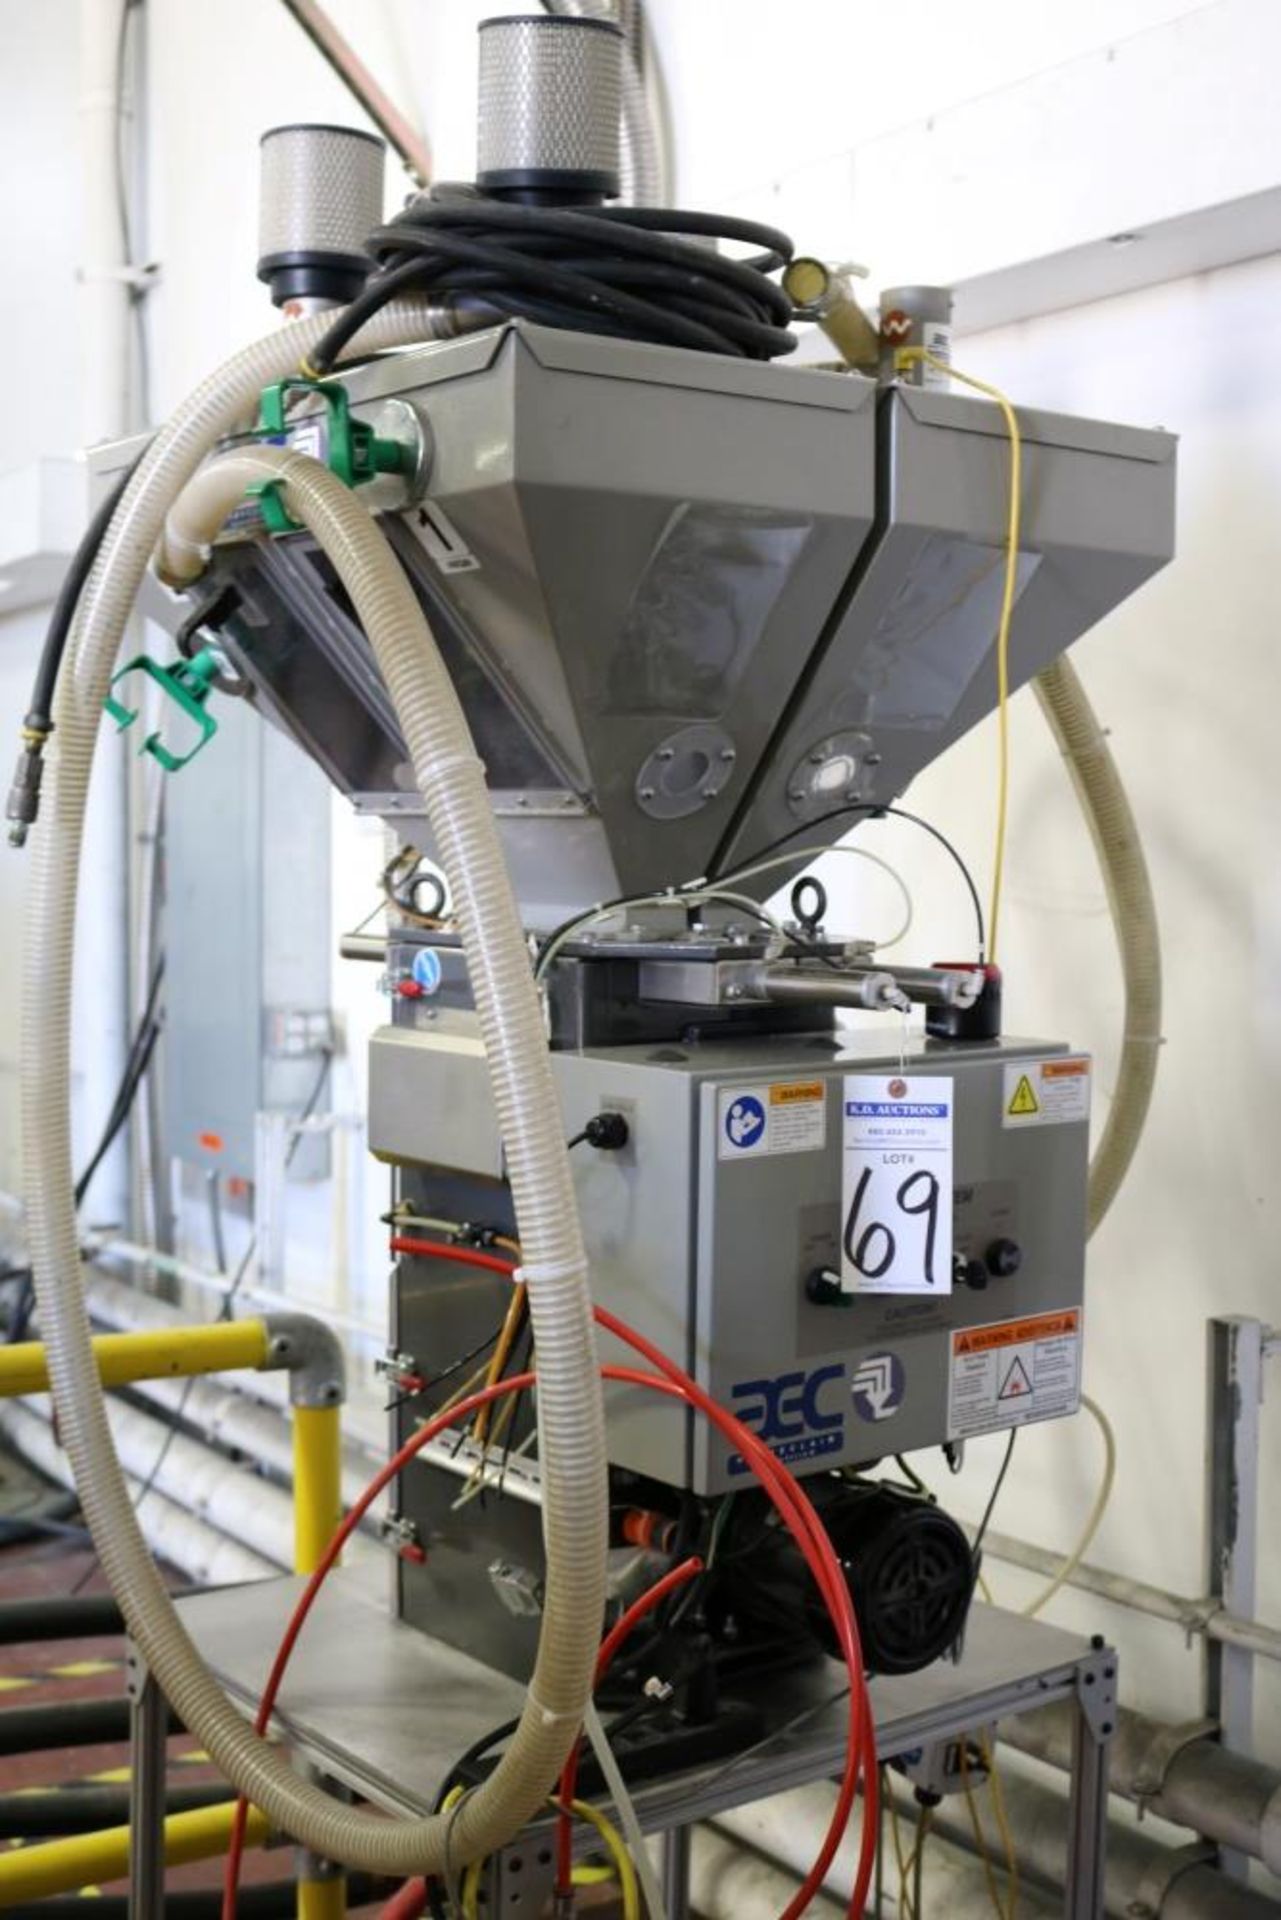 AEC Hydroclaim Blend and Reclaim Blending System on Stand - Image 5 of 5